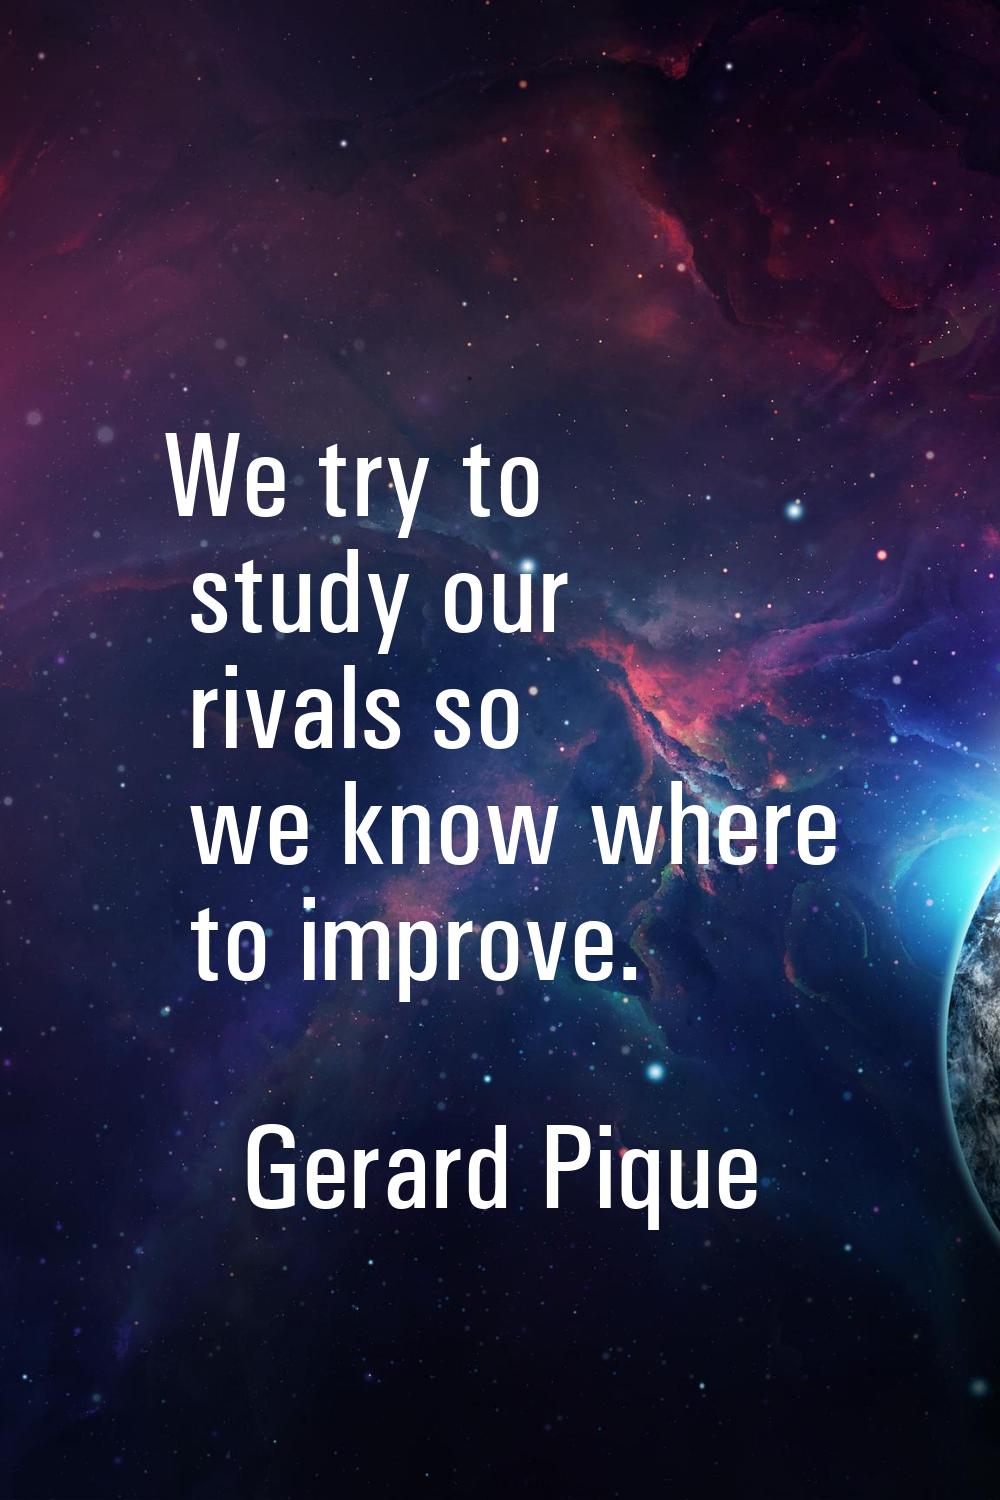 We try to study our rivals so we know where to improve.